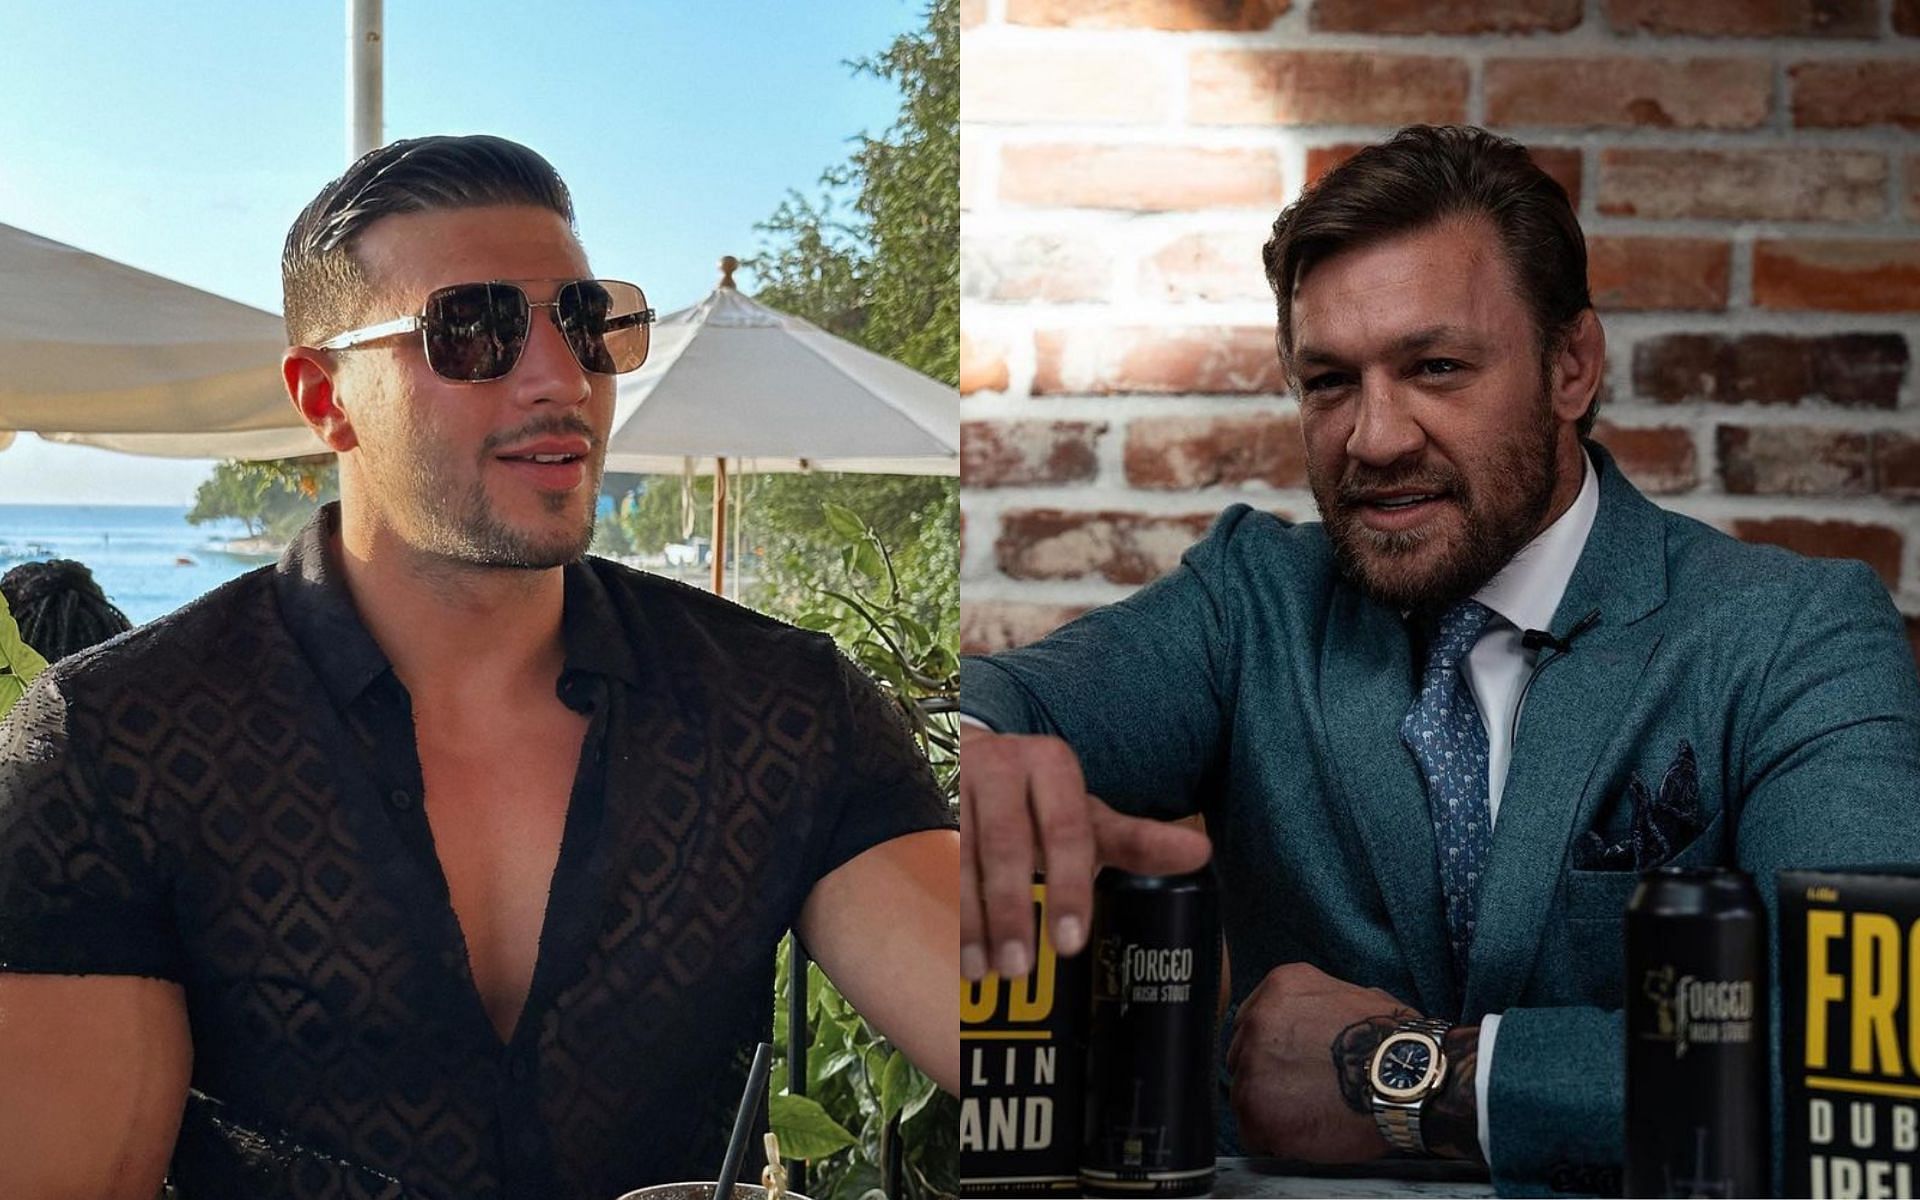 Tommy Fury (Left), Conor McGregor (Right) [Image courtesy: @tommyfury, @thenotoriousmma on Instagram]